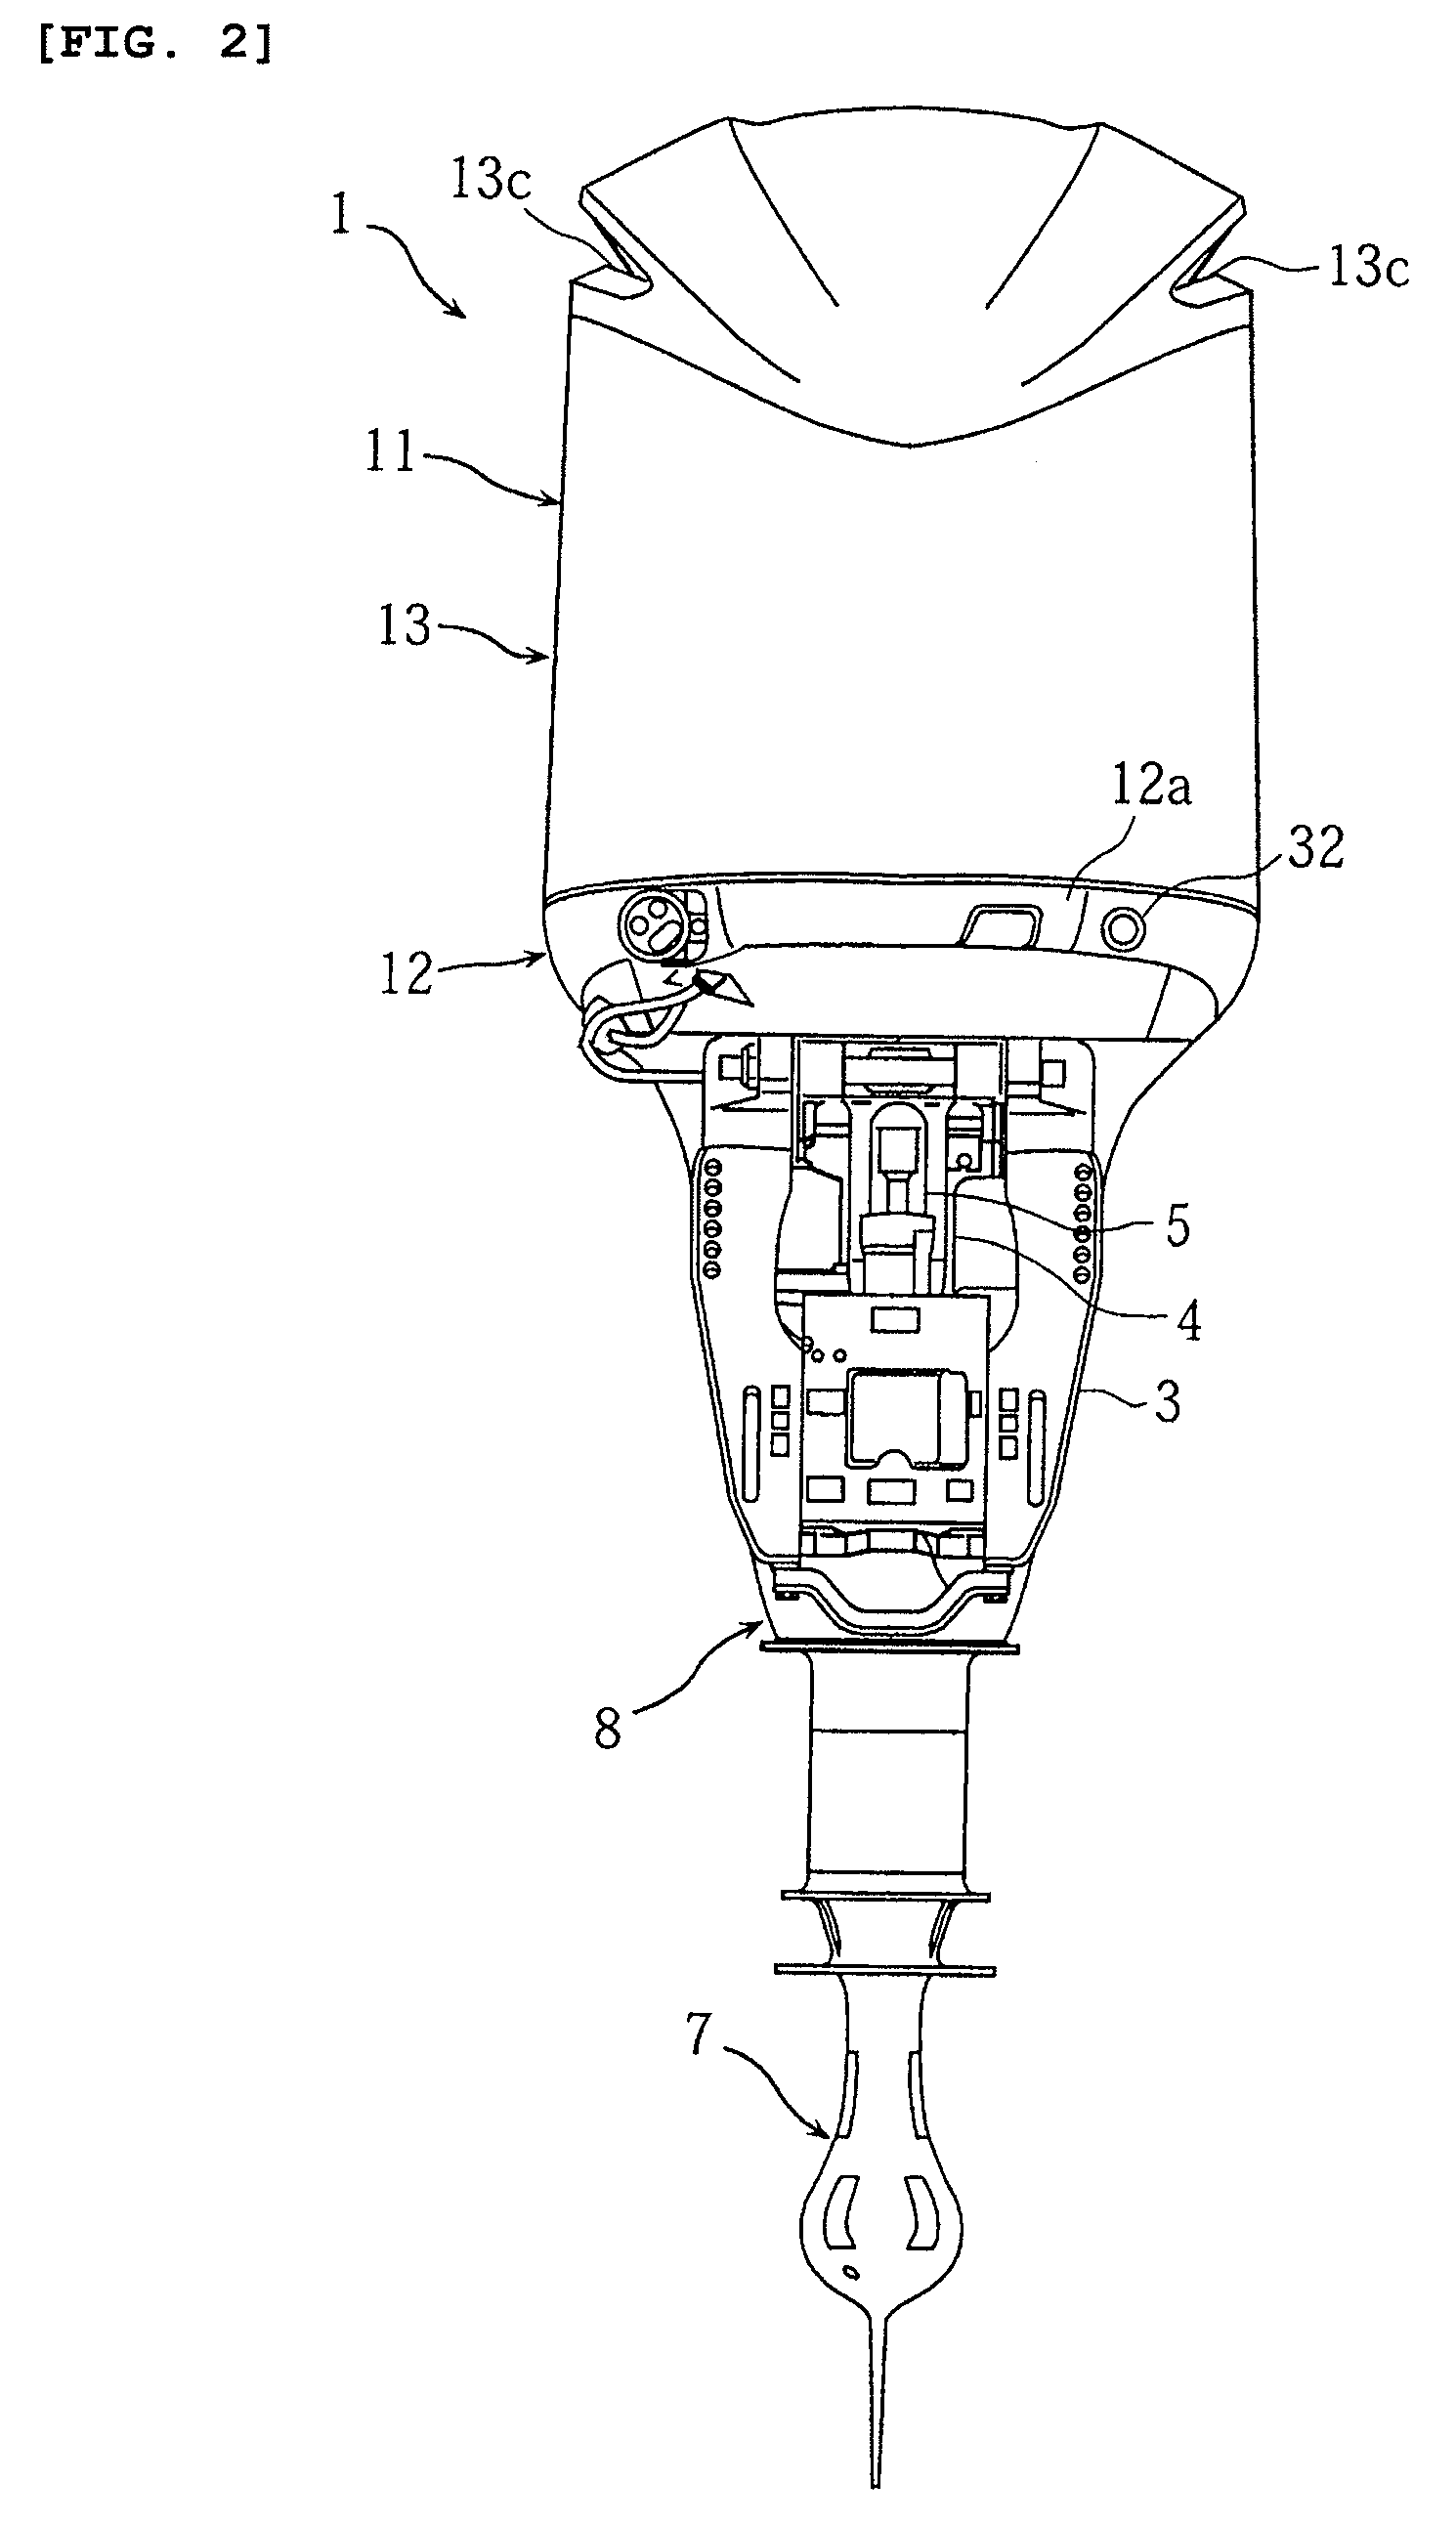 Outboard motor having a cowling